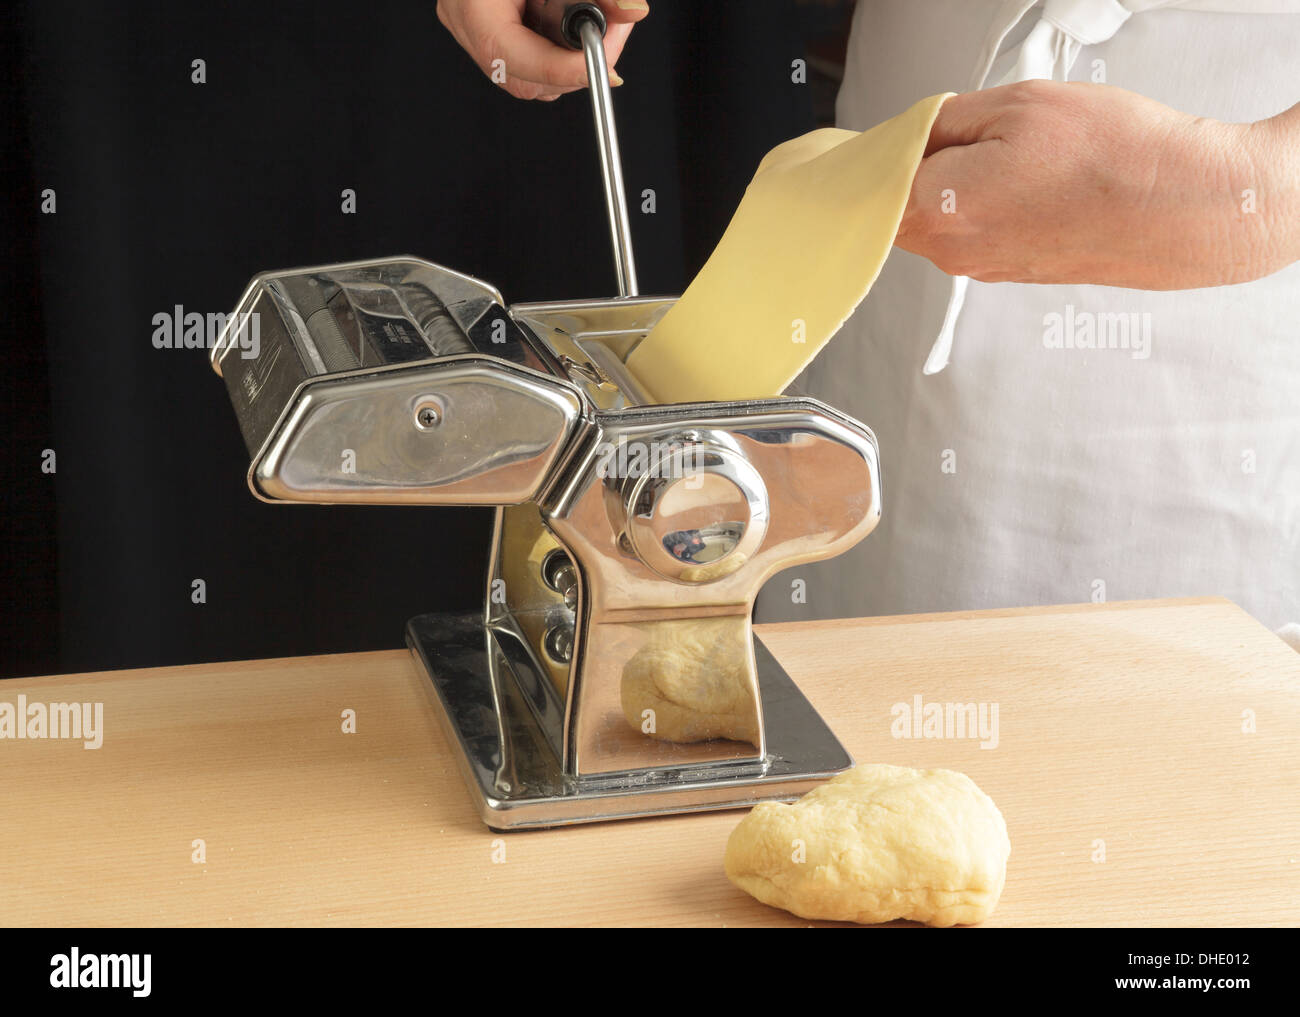 https://c8.alamy.com/comp/DHE012/rolling-pasta-sheets-with-a-machine-DHE012.jpg